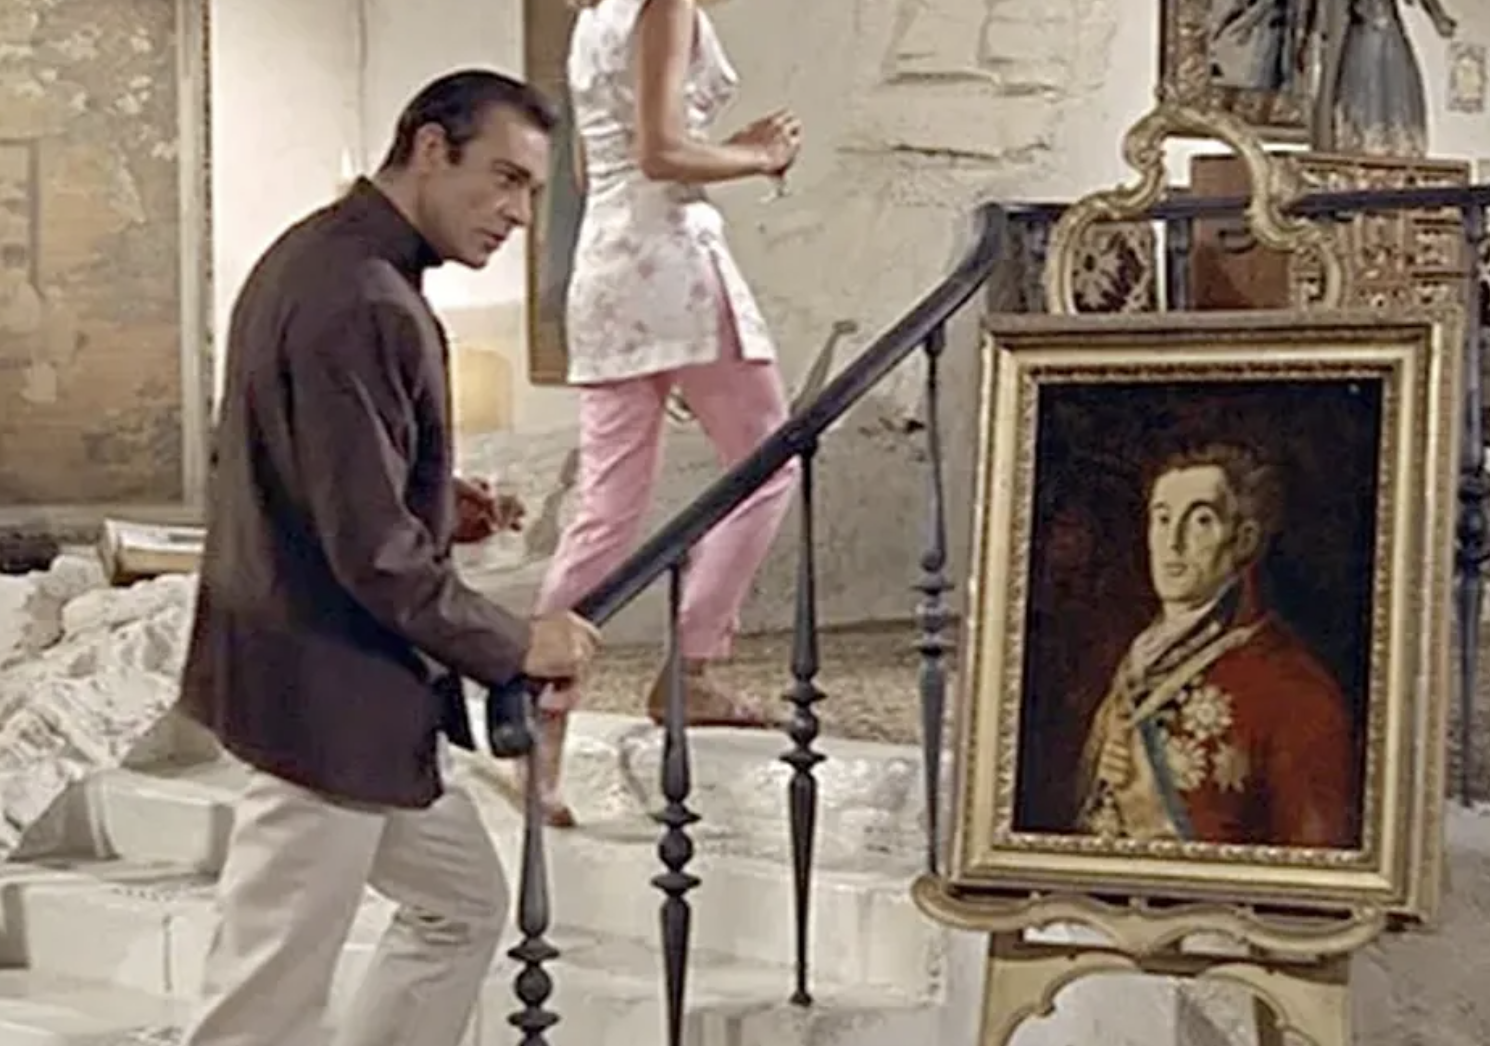 “In Doctor No, James Bond stops and looks for a second at a painting displayed in the Doctor's lair. The painting is Goya's Portrait of the Duke of Wellington, which had famously been stolen in 1961-- implying, of course, that Doctor No was behind the theft.”